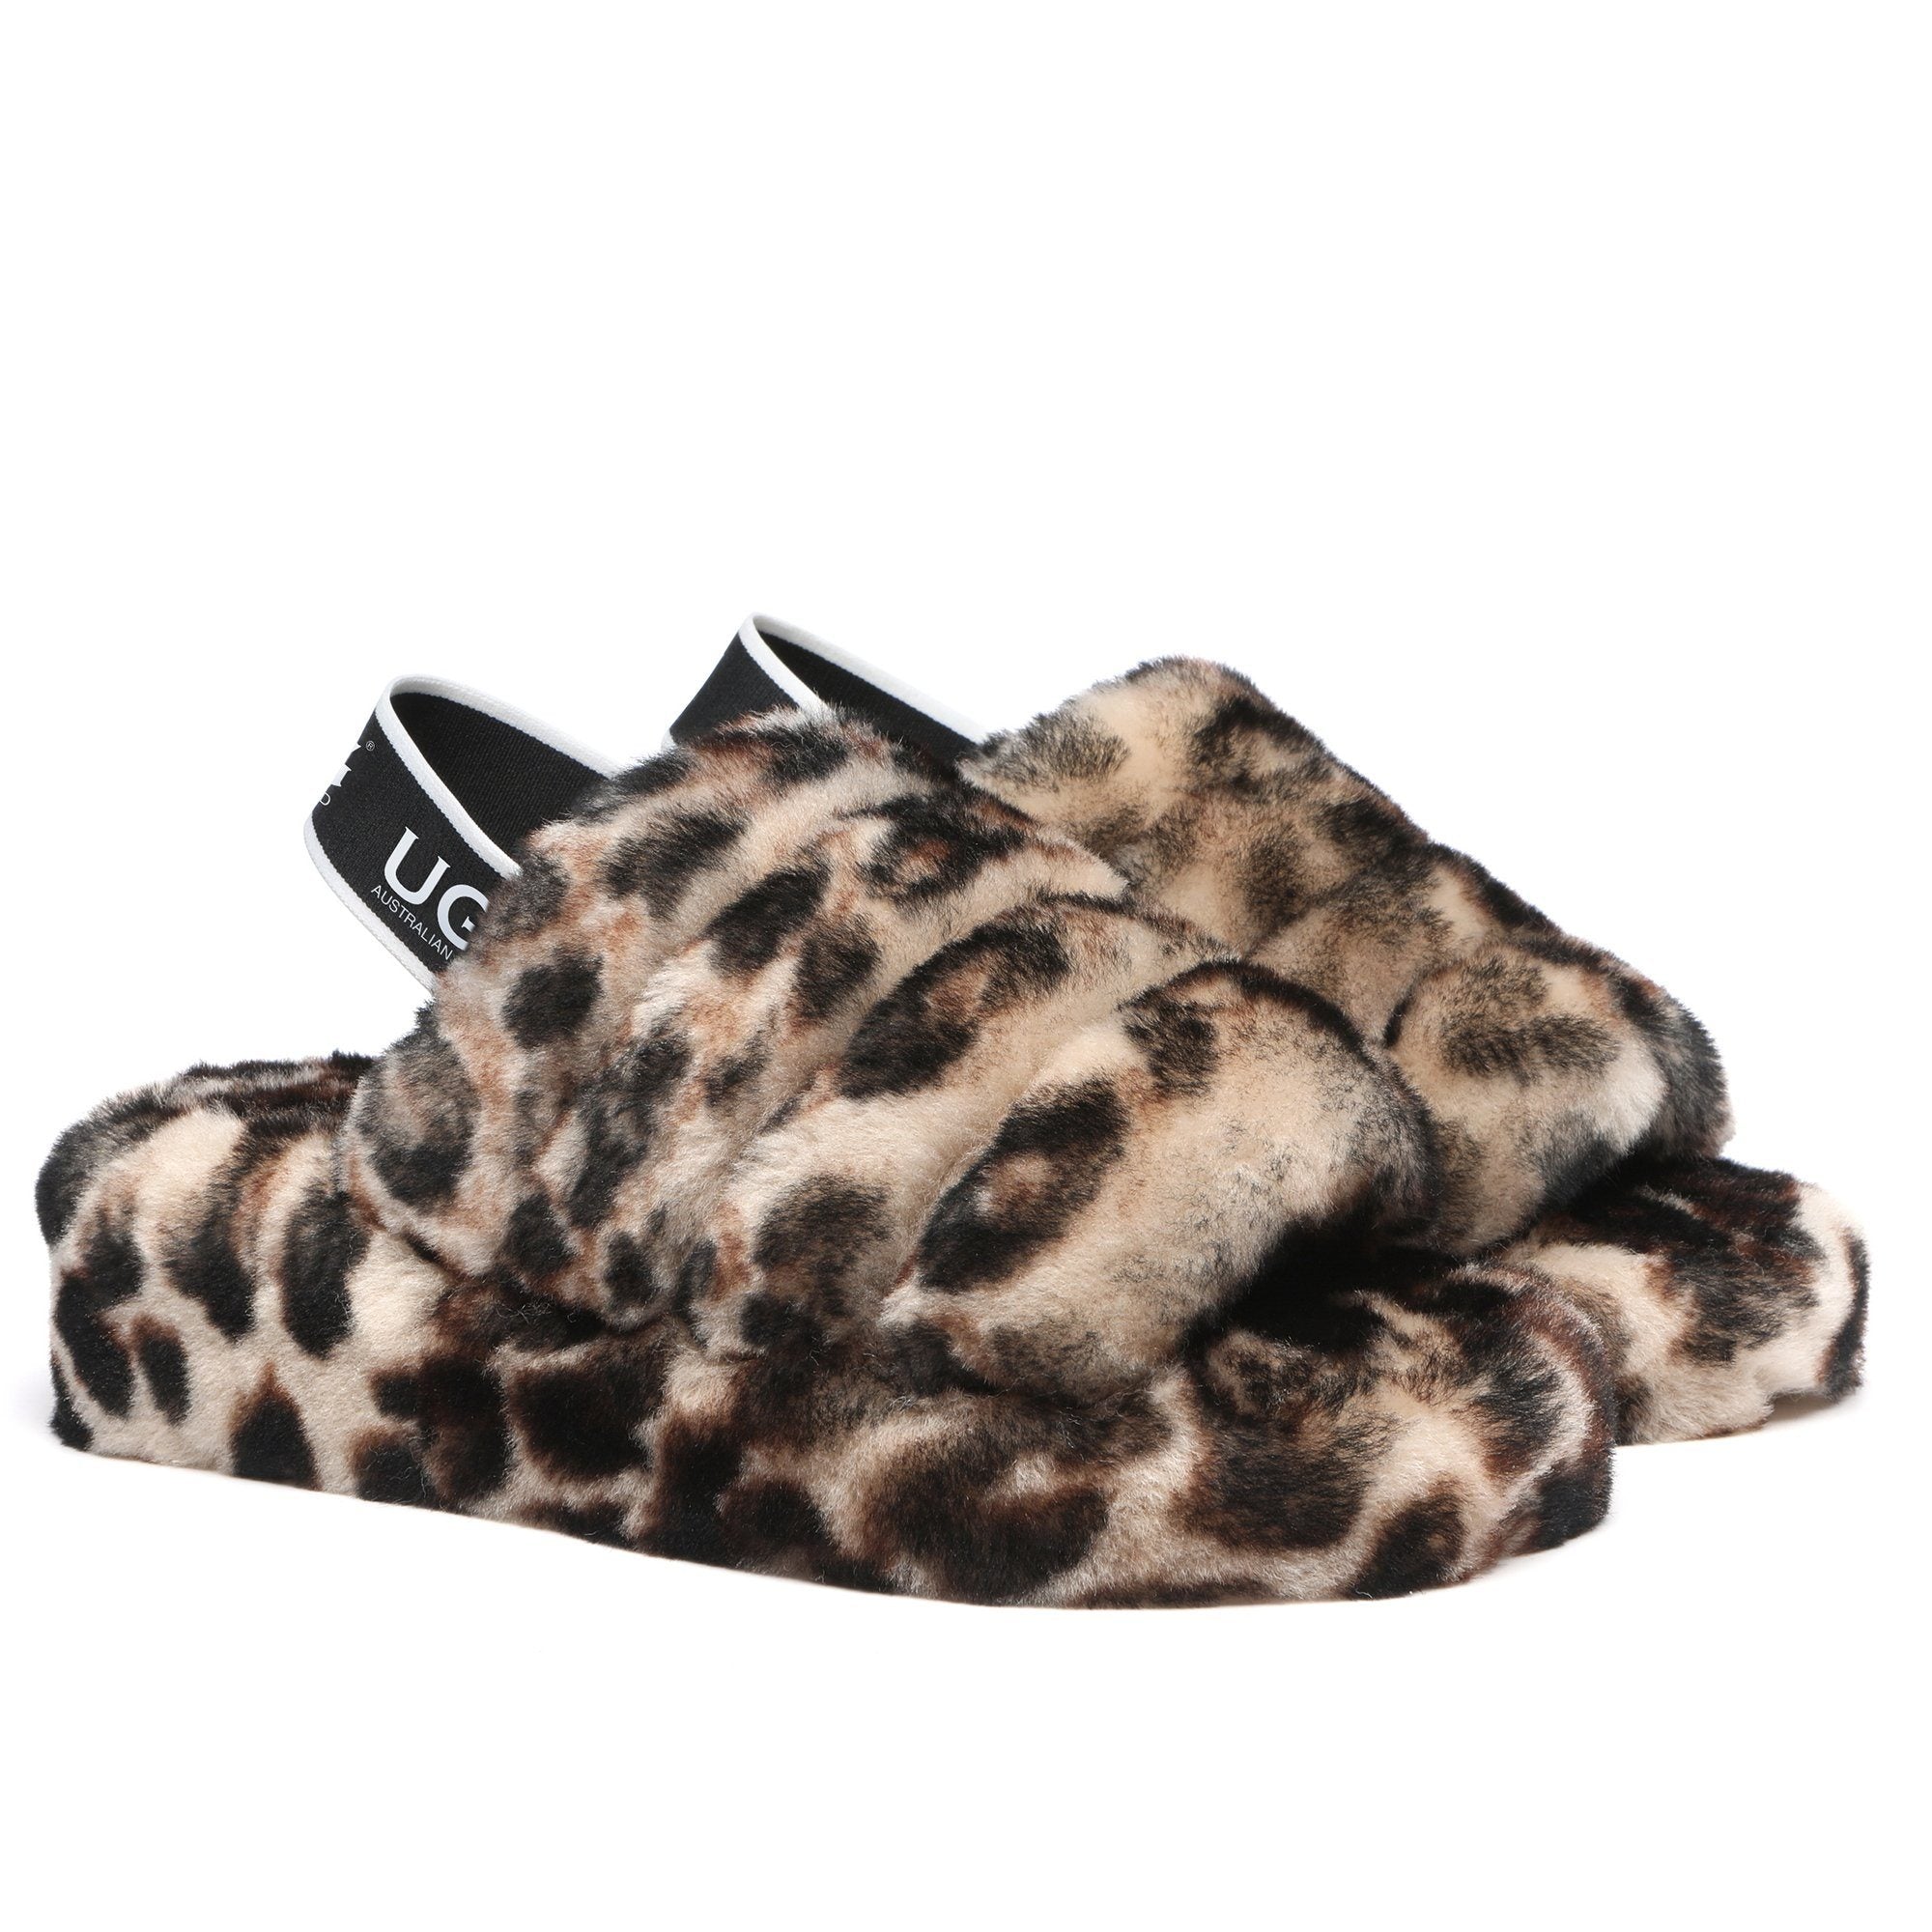 UGG Fluffilicious Leopard Slippers